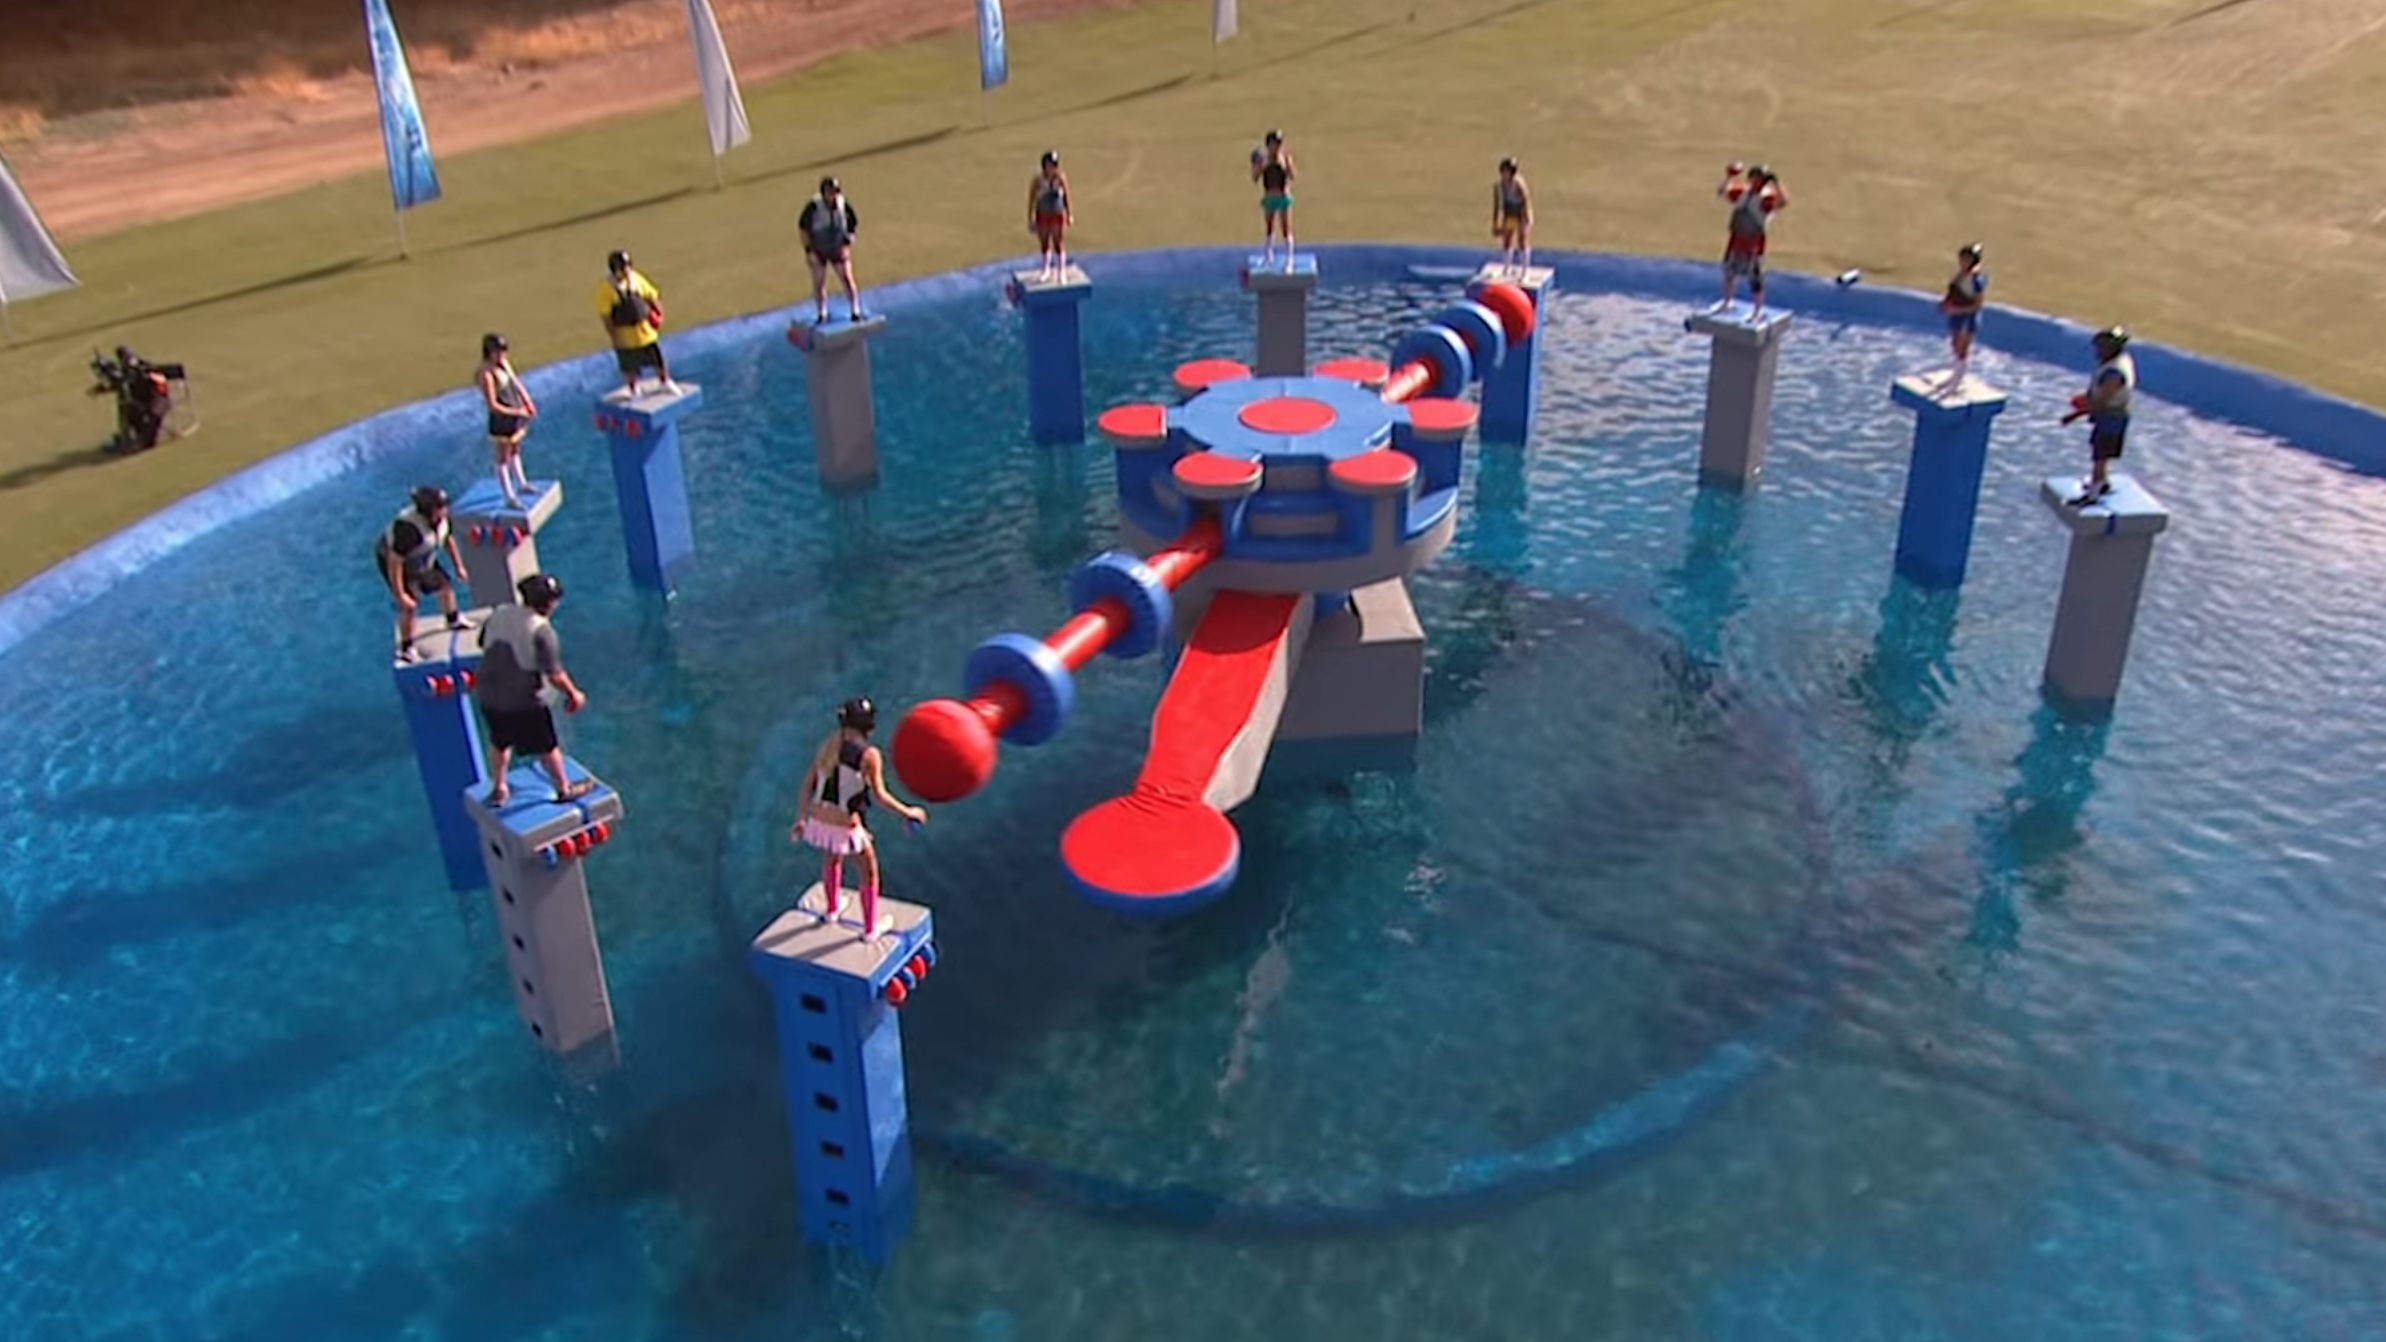 Wipeout' Contestant Dies After Completing Game Show Obstacle Course